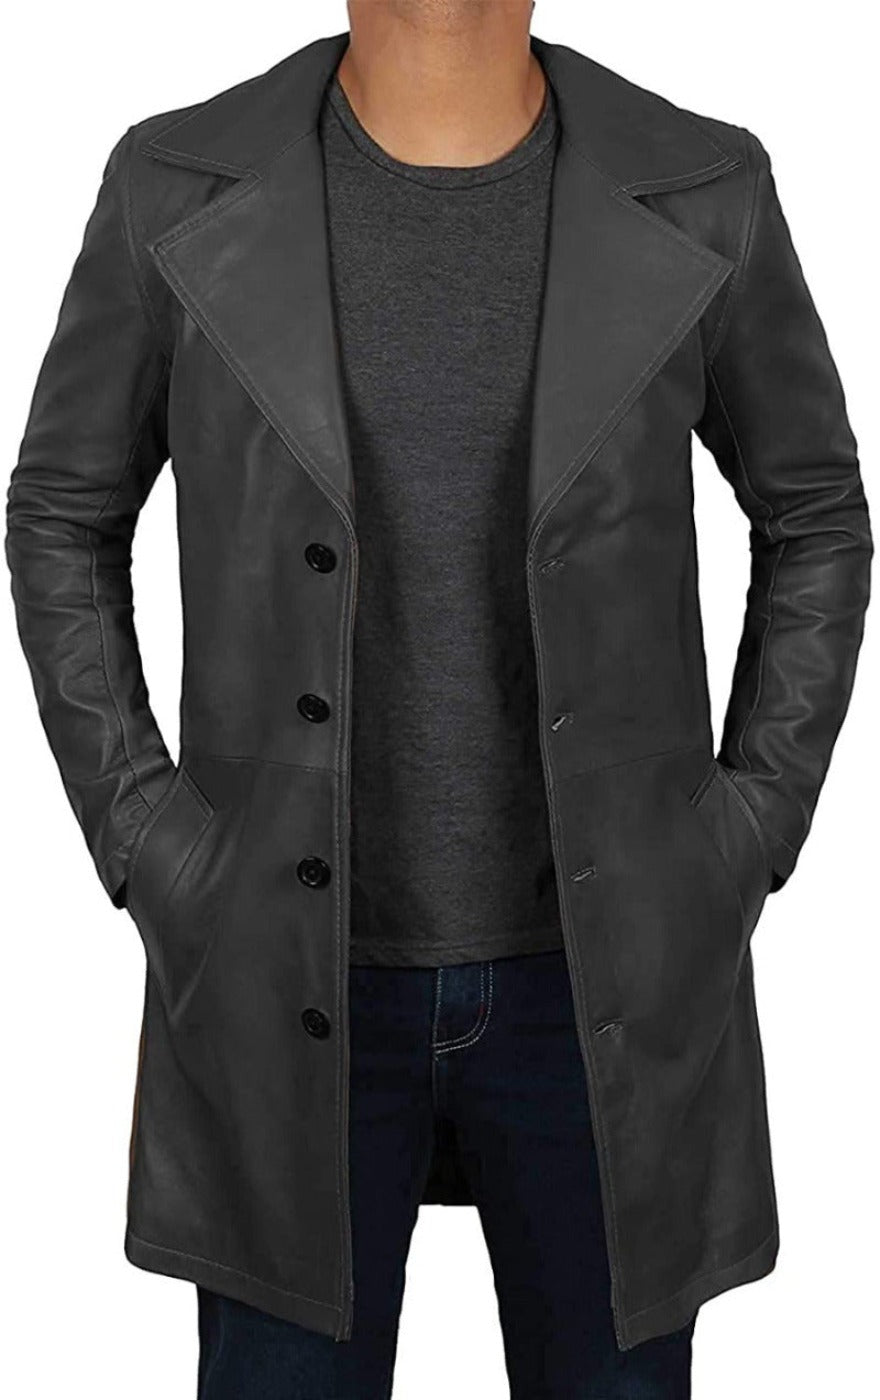 Mens long leather trench coat black, front view